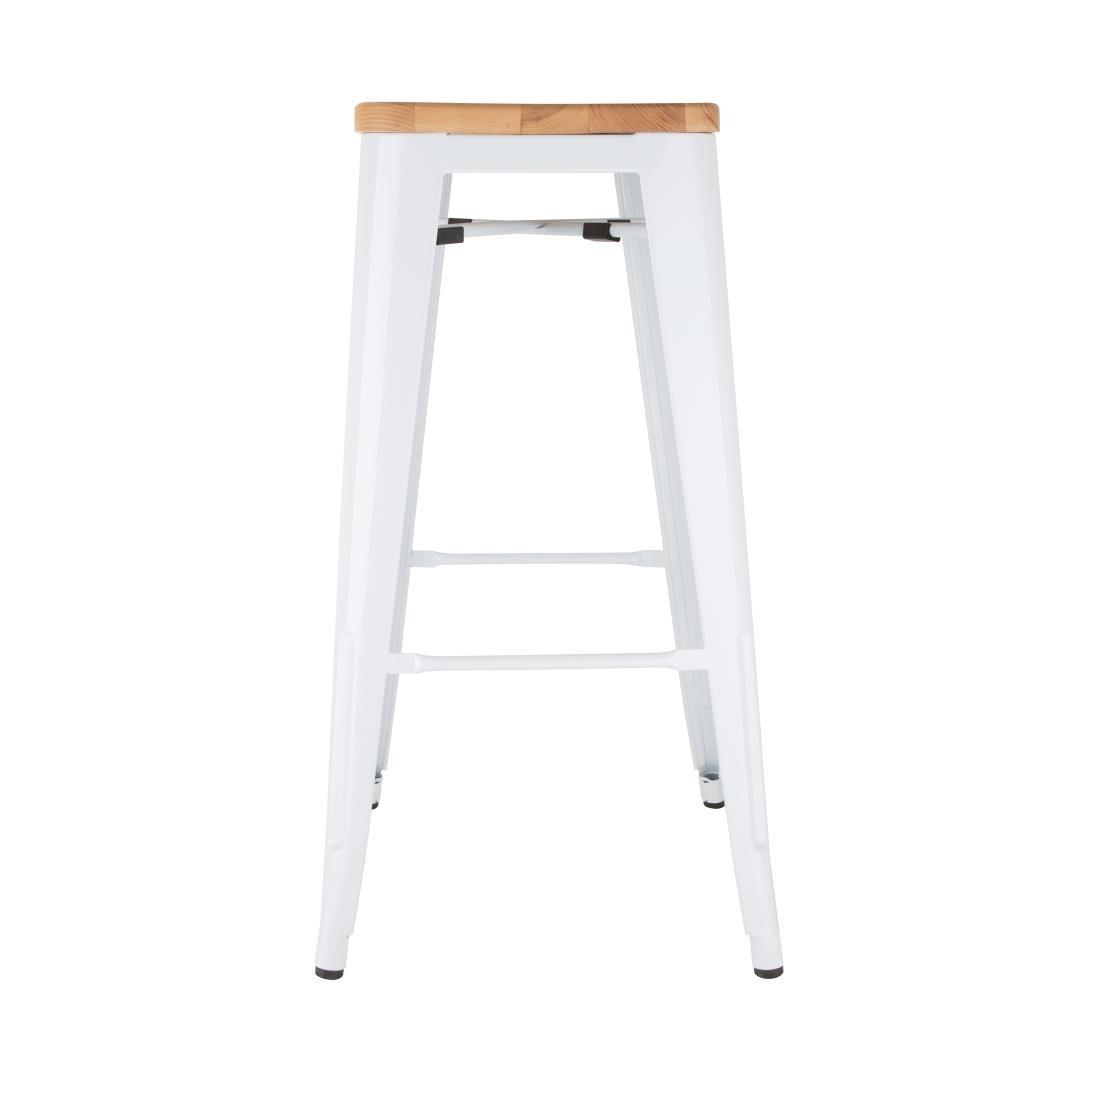 Bolero Bistro High Stools with Wooden Seatpad White (Pack of 4) - DW739  - 2